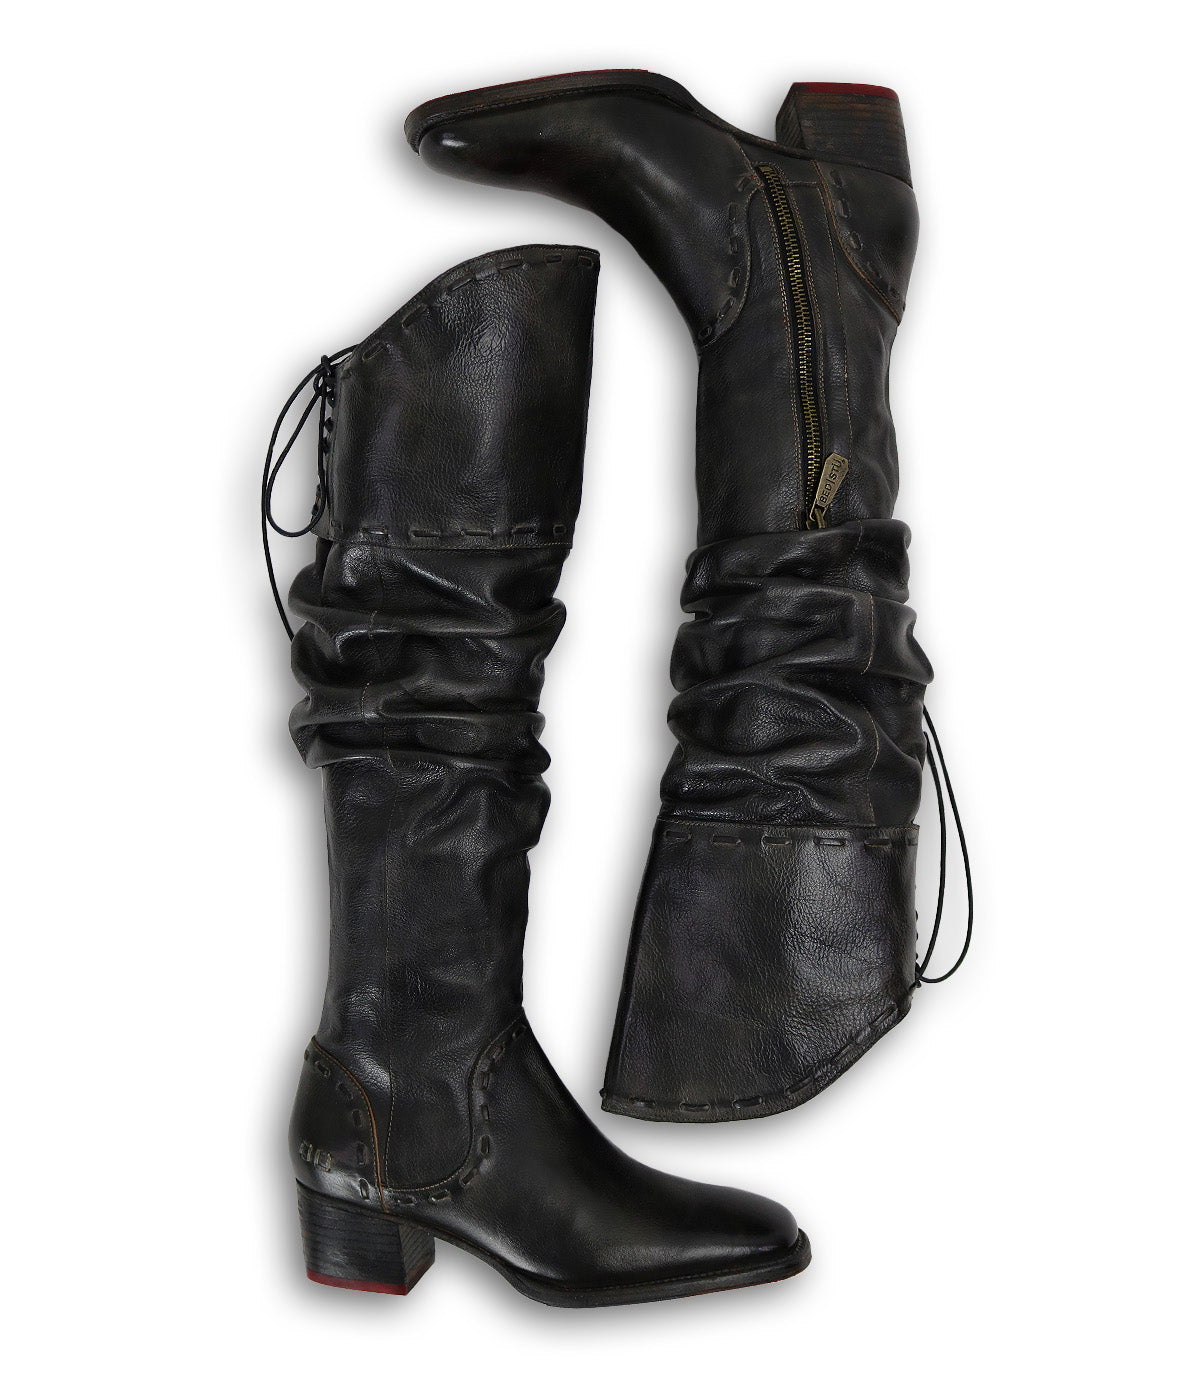 A pair of Bed Stu Leilani women's black leather boots.